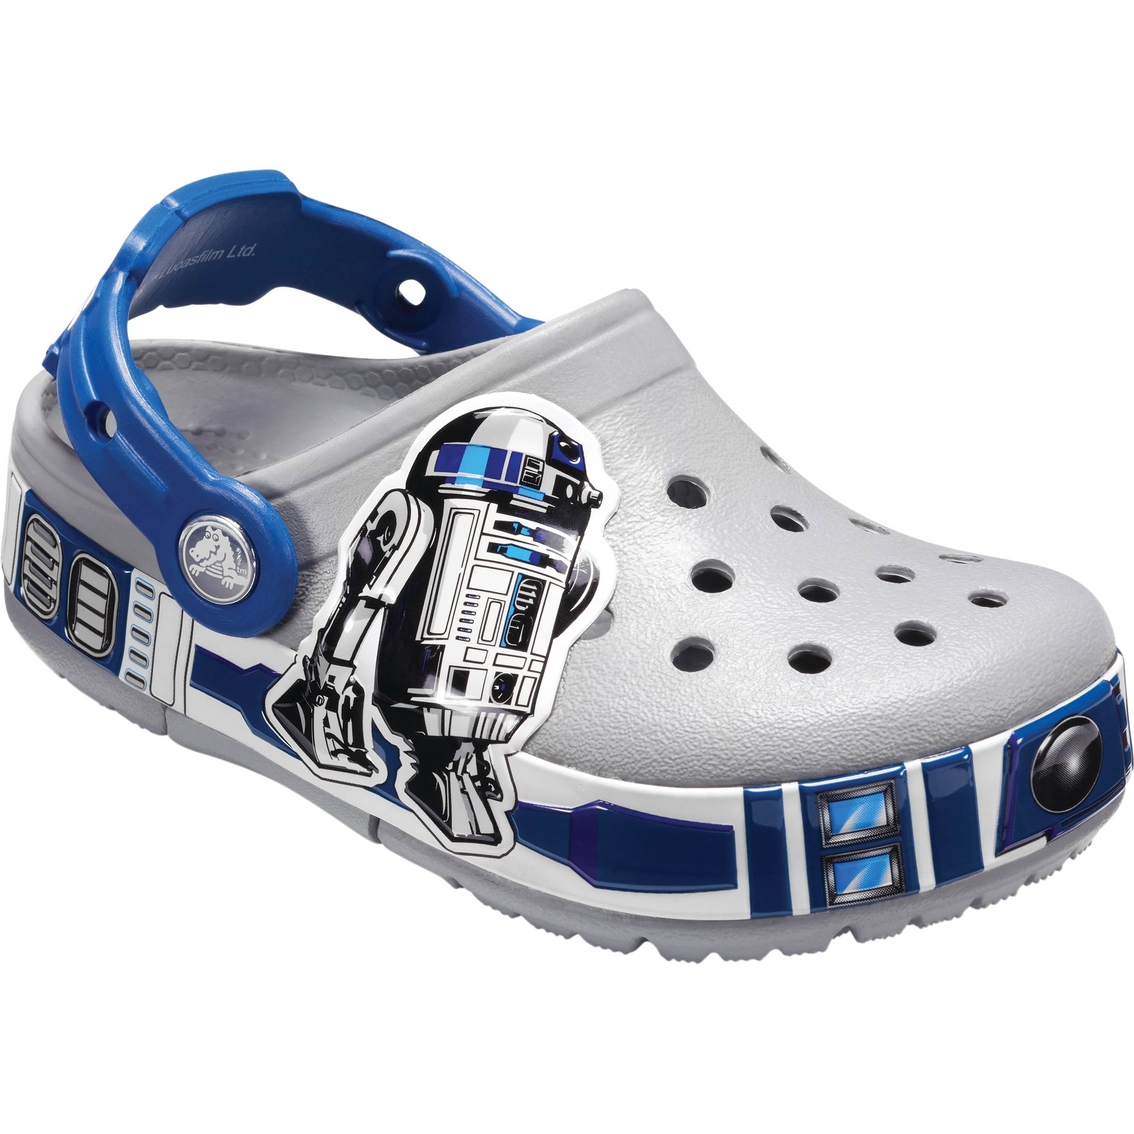 Crocs Toddler Boys R2d2 Lighted Clogs | Sneakers | Shoes | Shop The ...